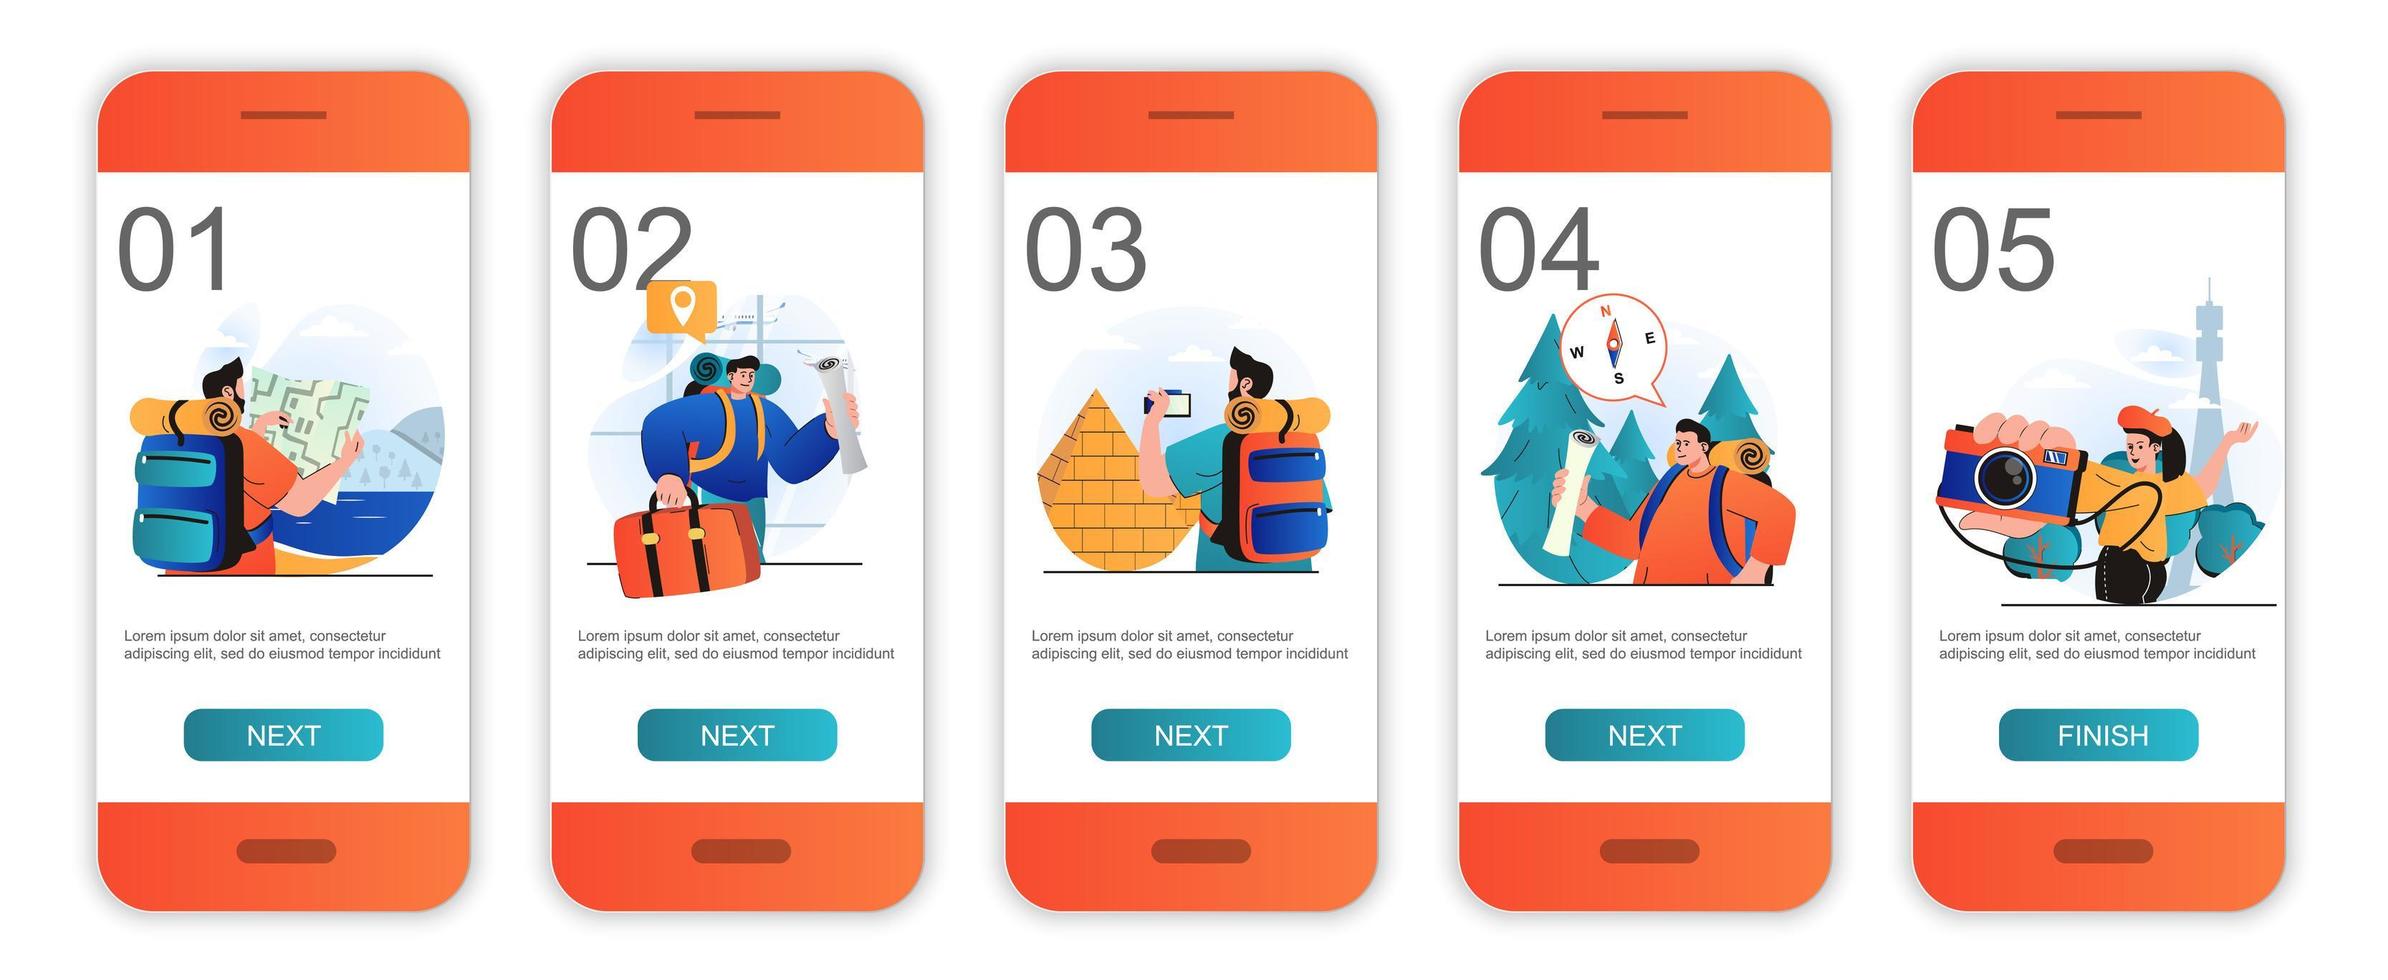 Traveling concept onboarding screens for mobile app templates. Tourists going worldwide trip. Modern UI, UX, GUI screens user interface kit with people scenes for web design. Vector illustration